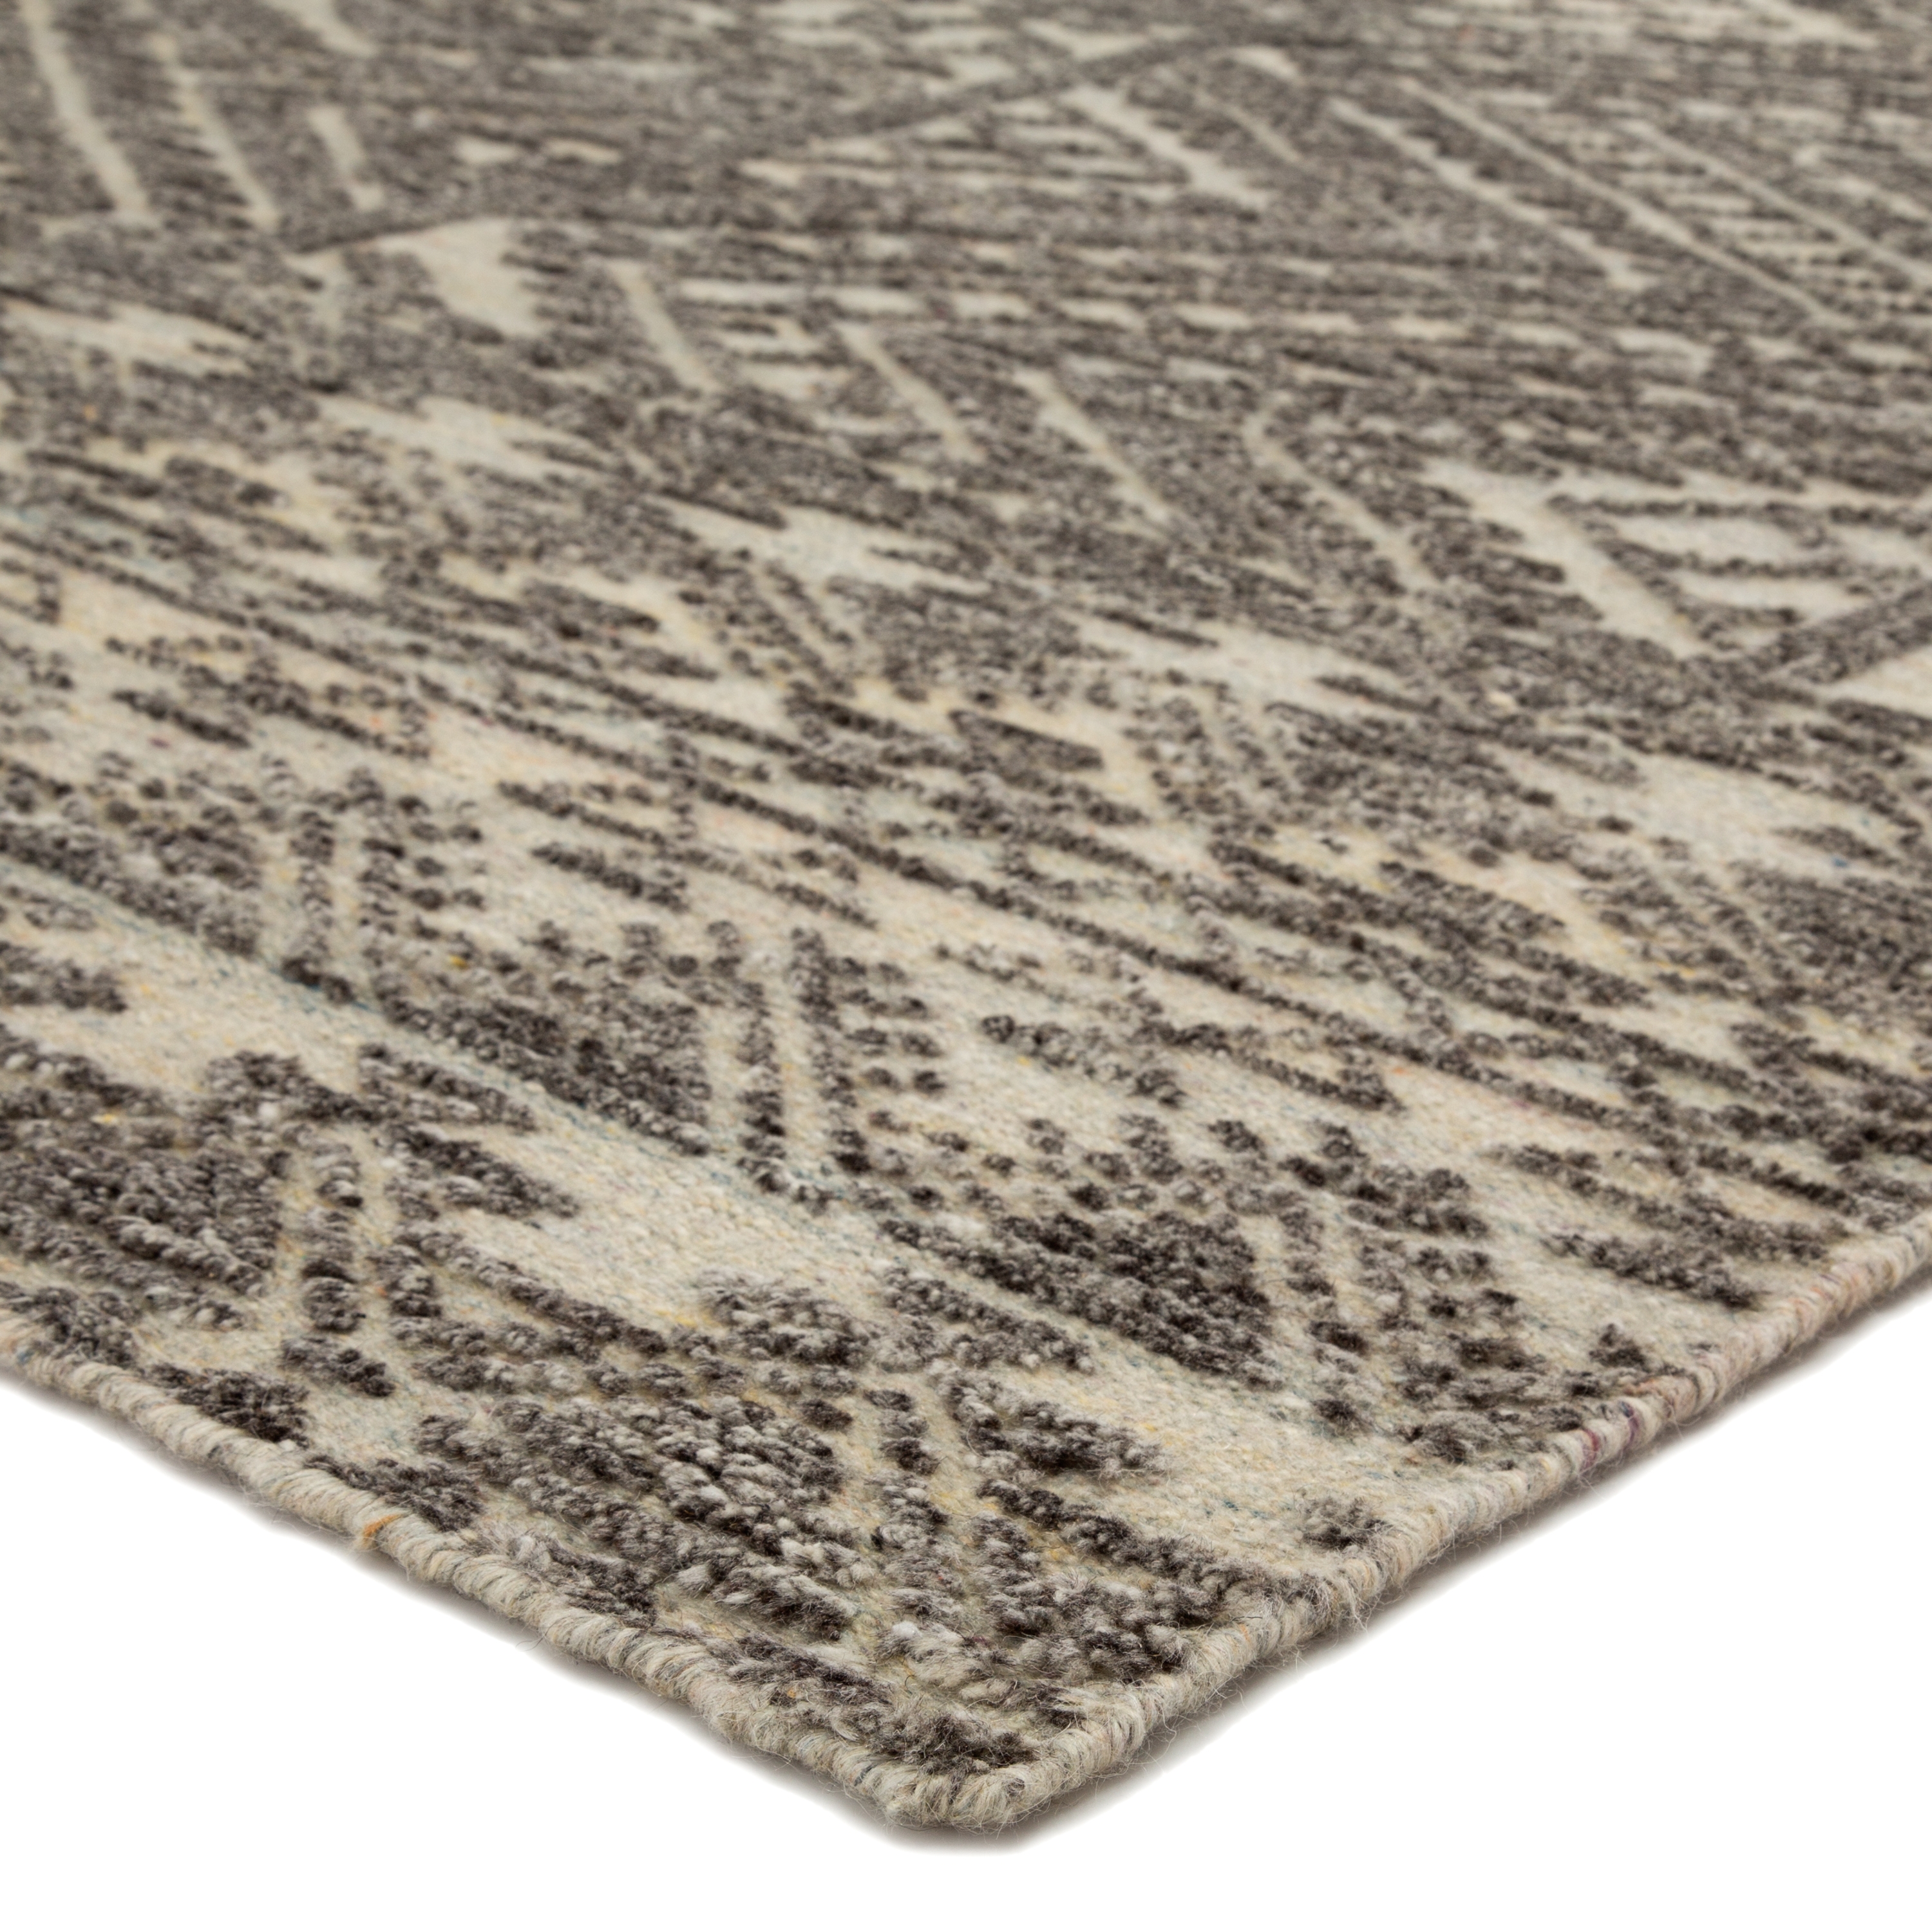 Prentice Hand-Knotted Geometric Dark Gray/ Taupe Area Rug (8'X11') - Image 1